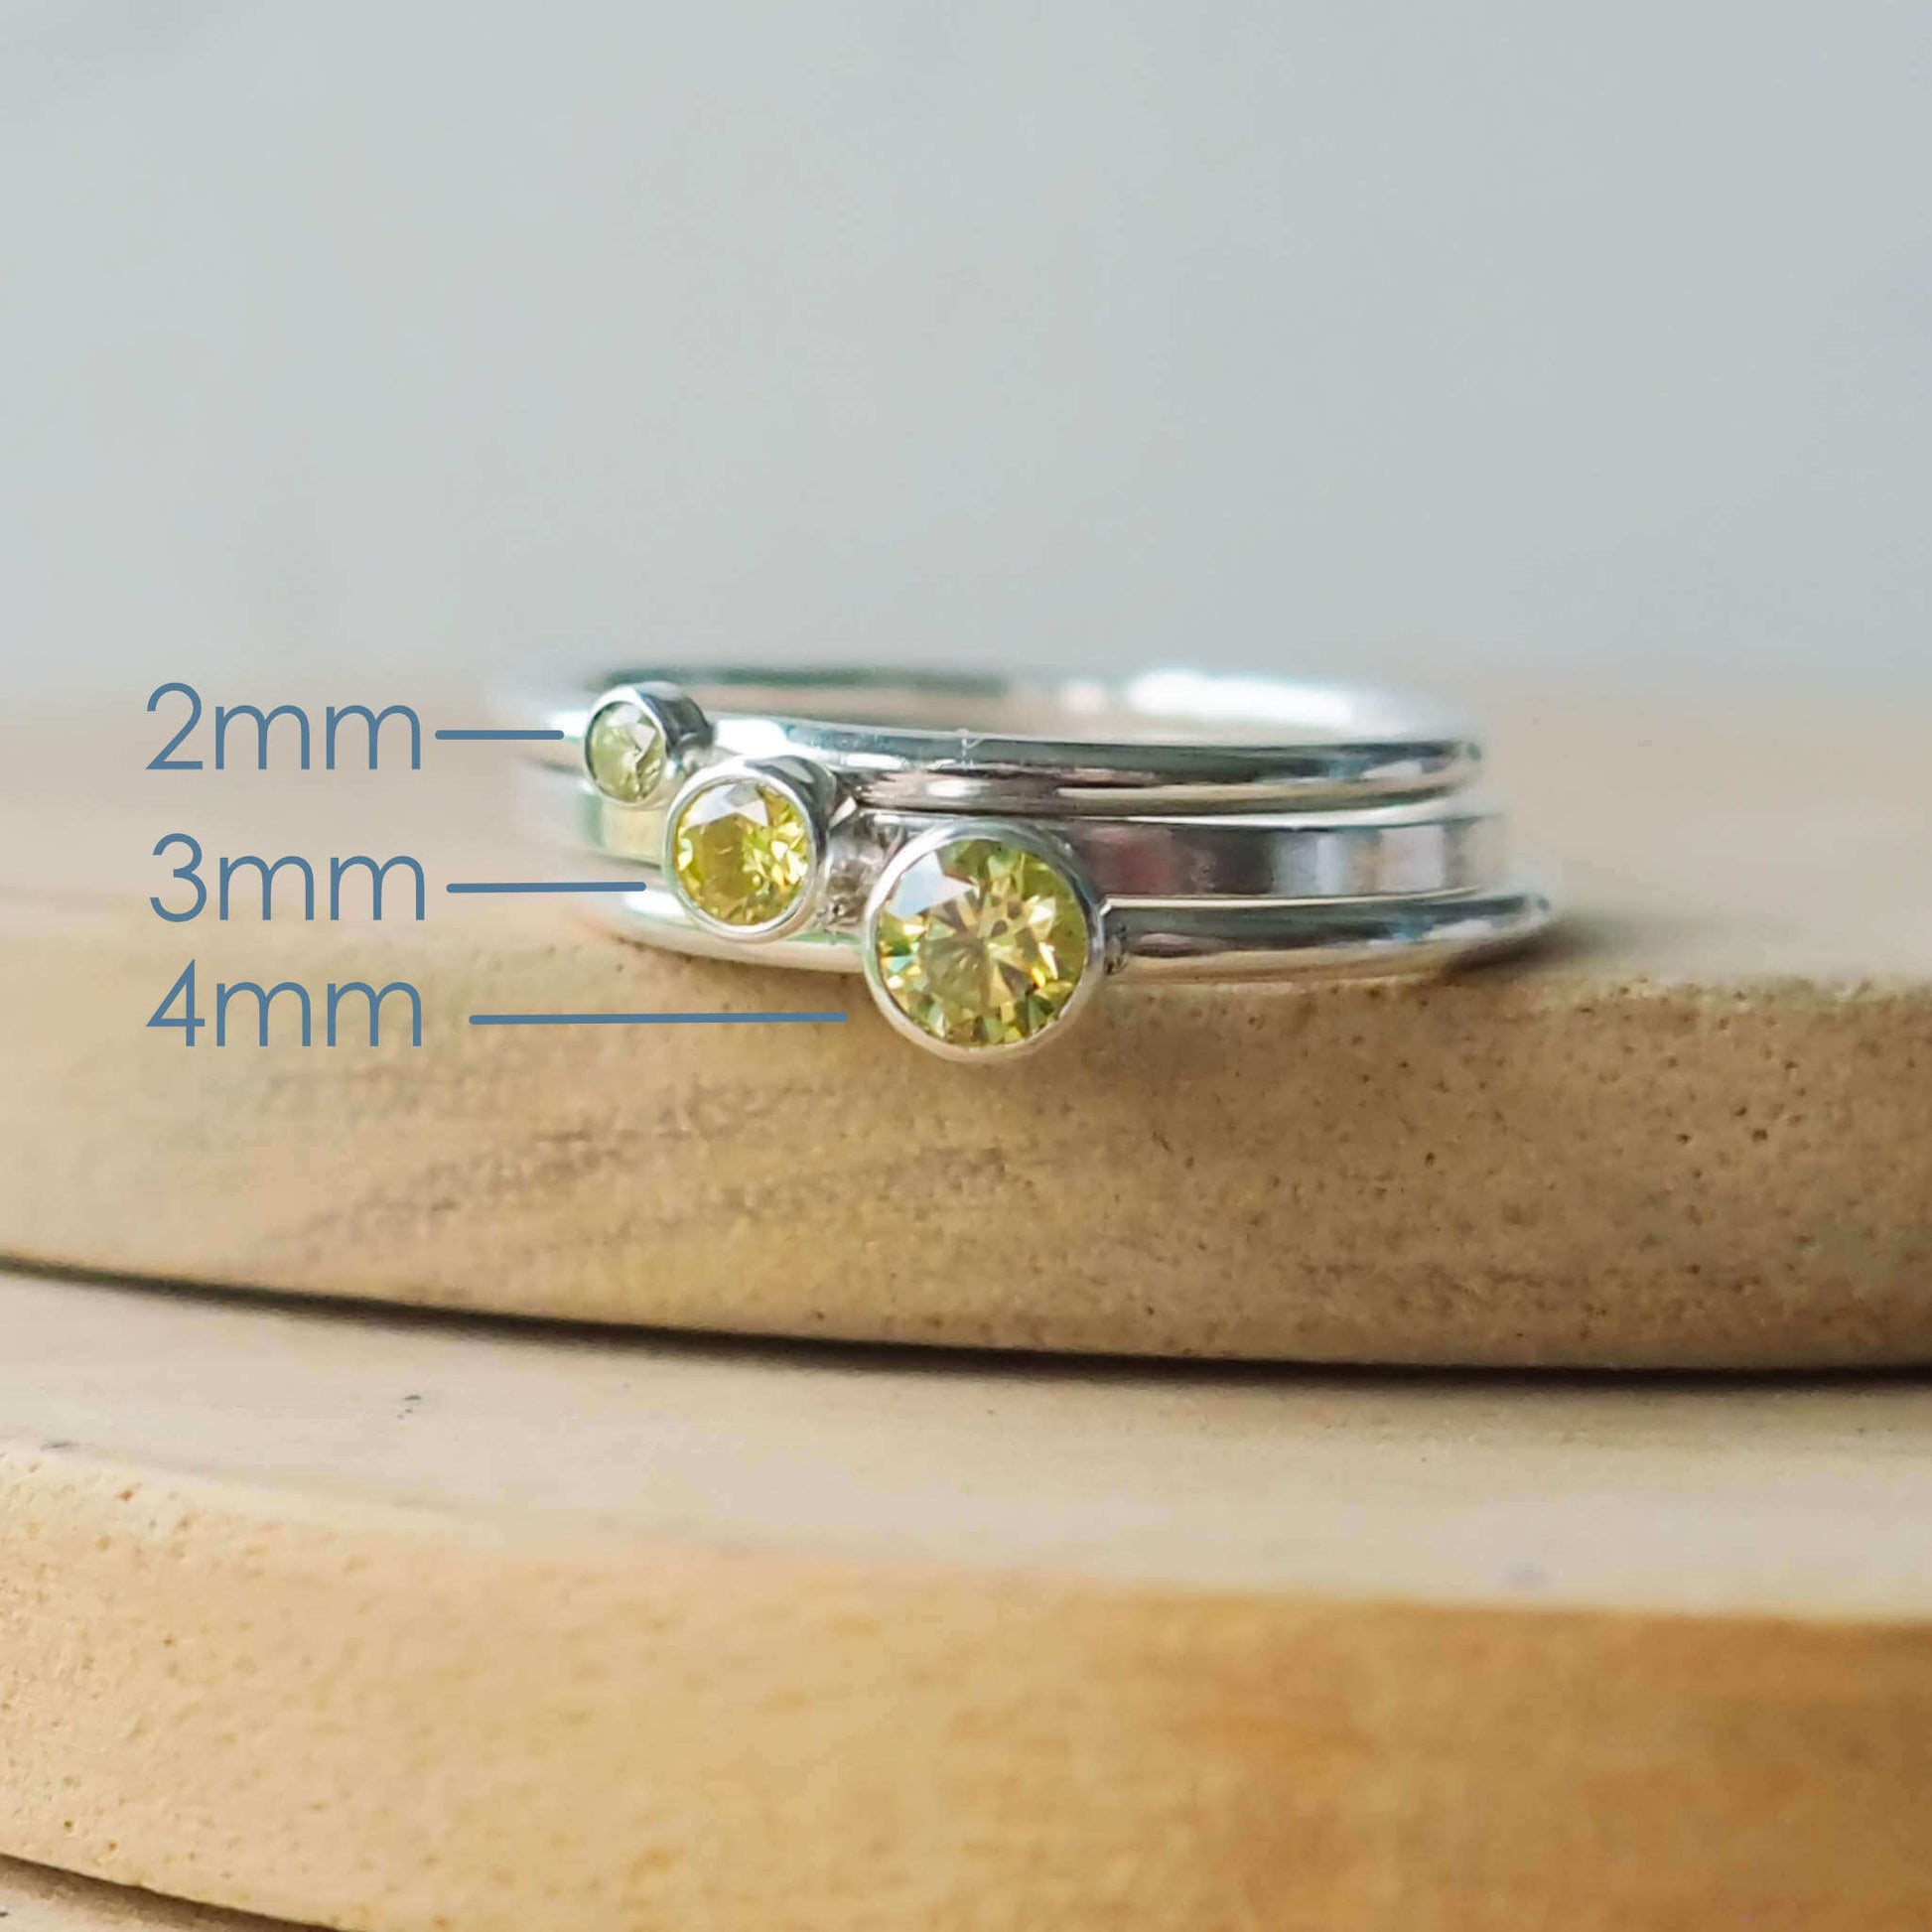 Three rings showing the square and round band styles with three different sized Cubic Zirconia in a light moss green Peridot. The rings are made from Sterling Silver and a round pale green cubic zirconia measuring 2,3 or 4mm in size. Handmade by maram jewellery in Scotland